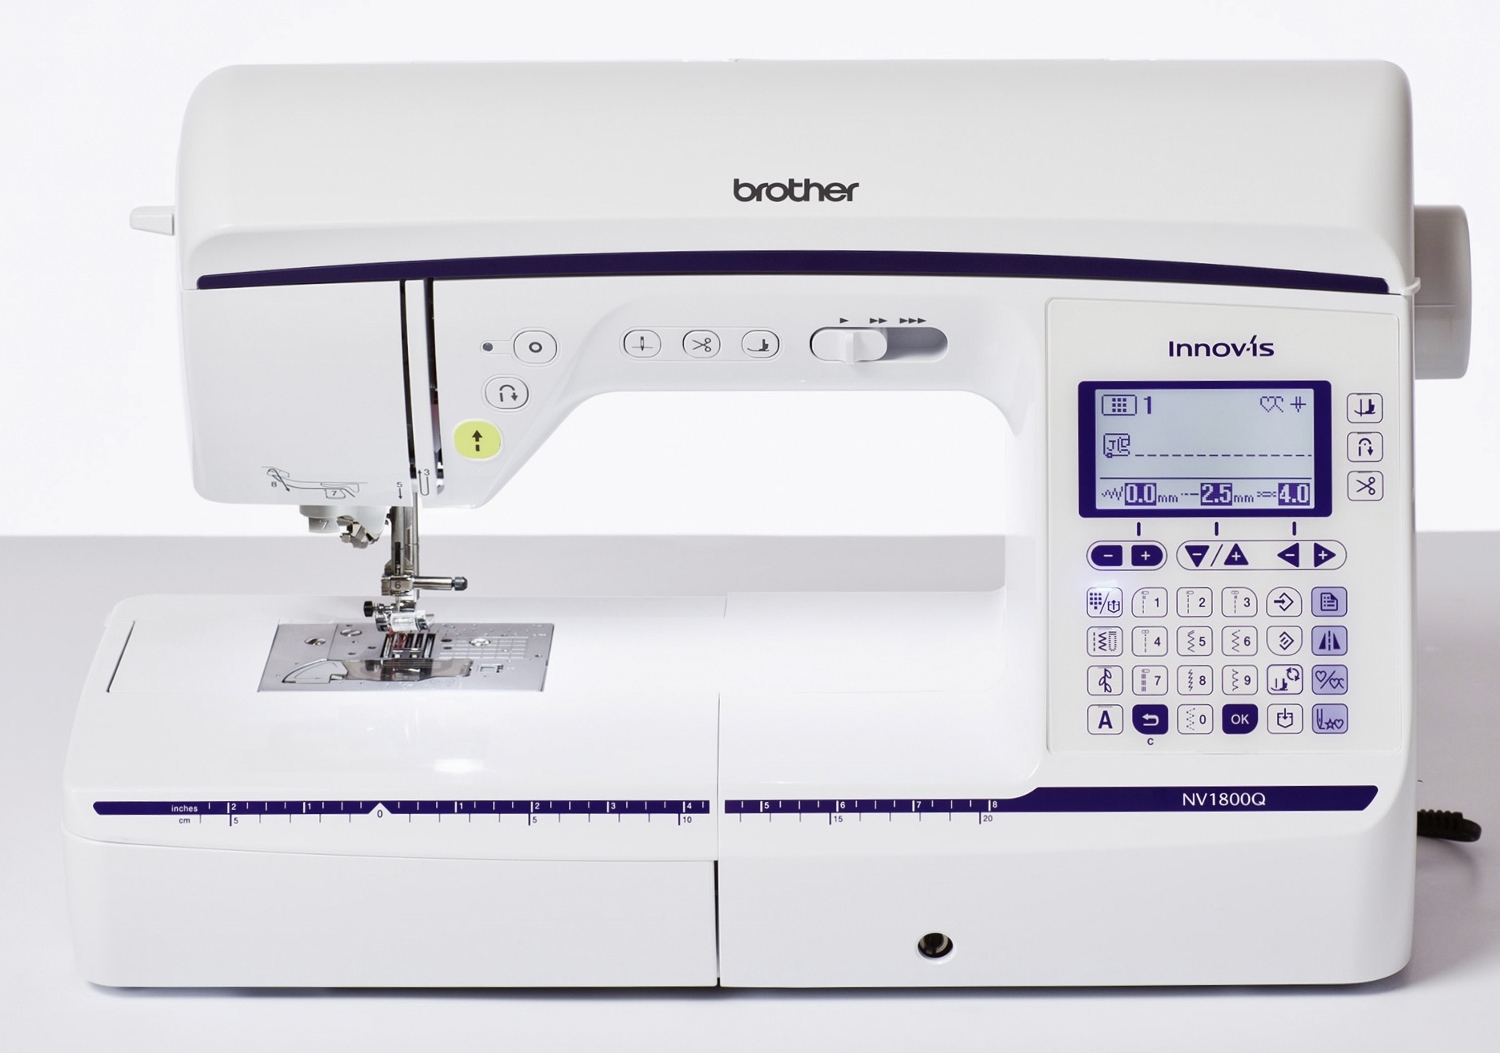 Innov-is NV1800Q Sewing Machine - Brother - Brother Machines